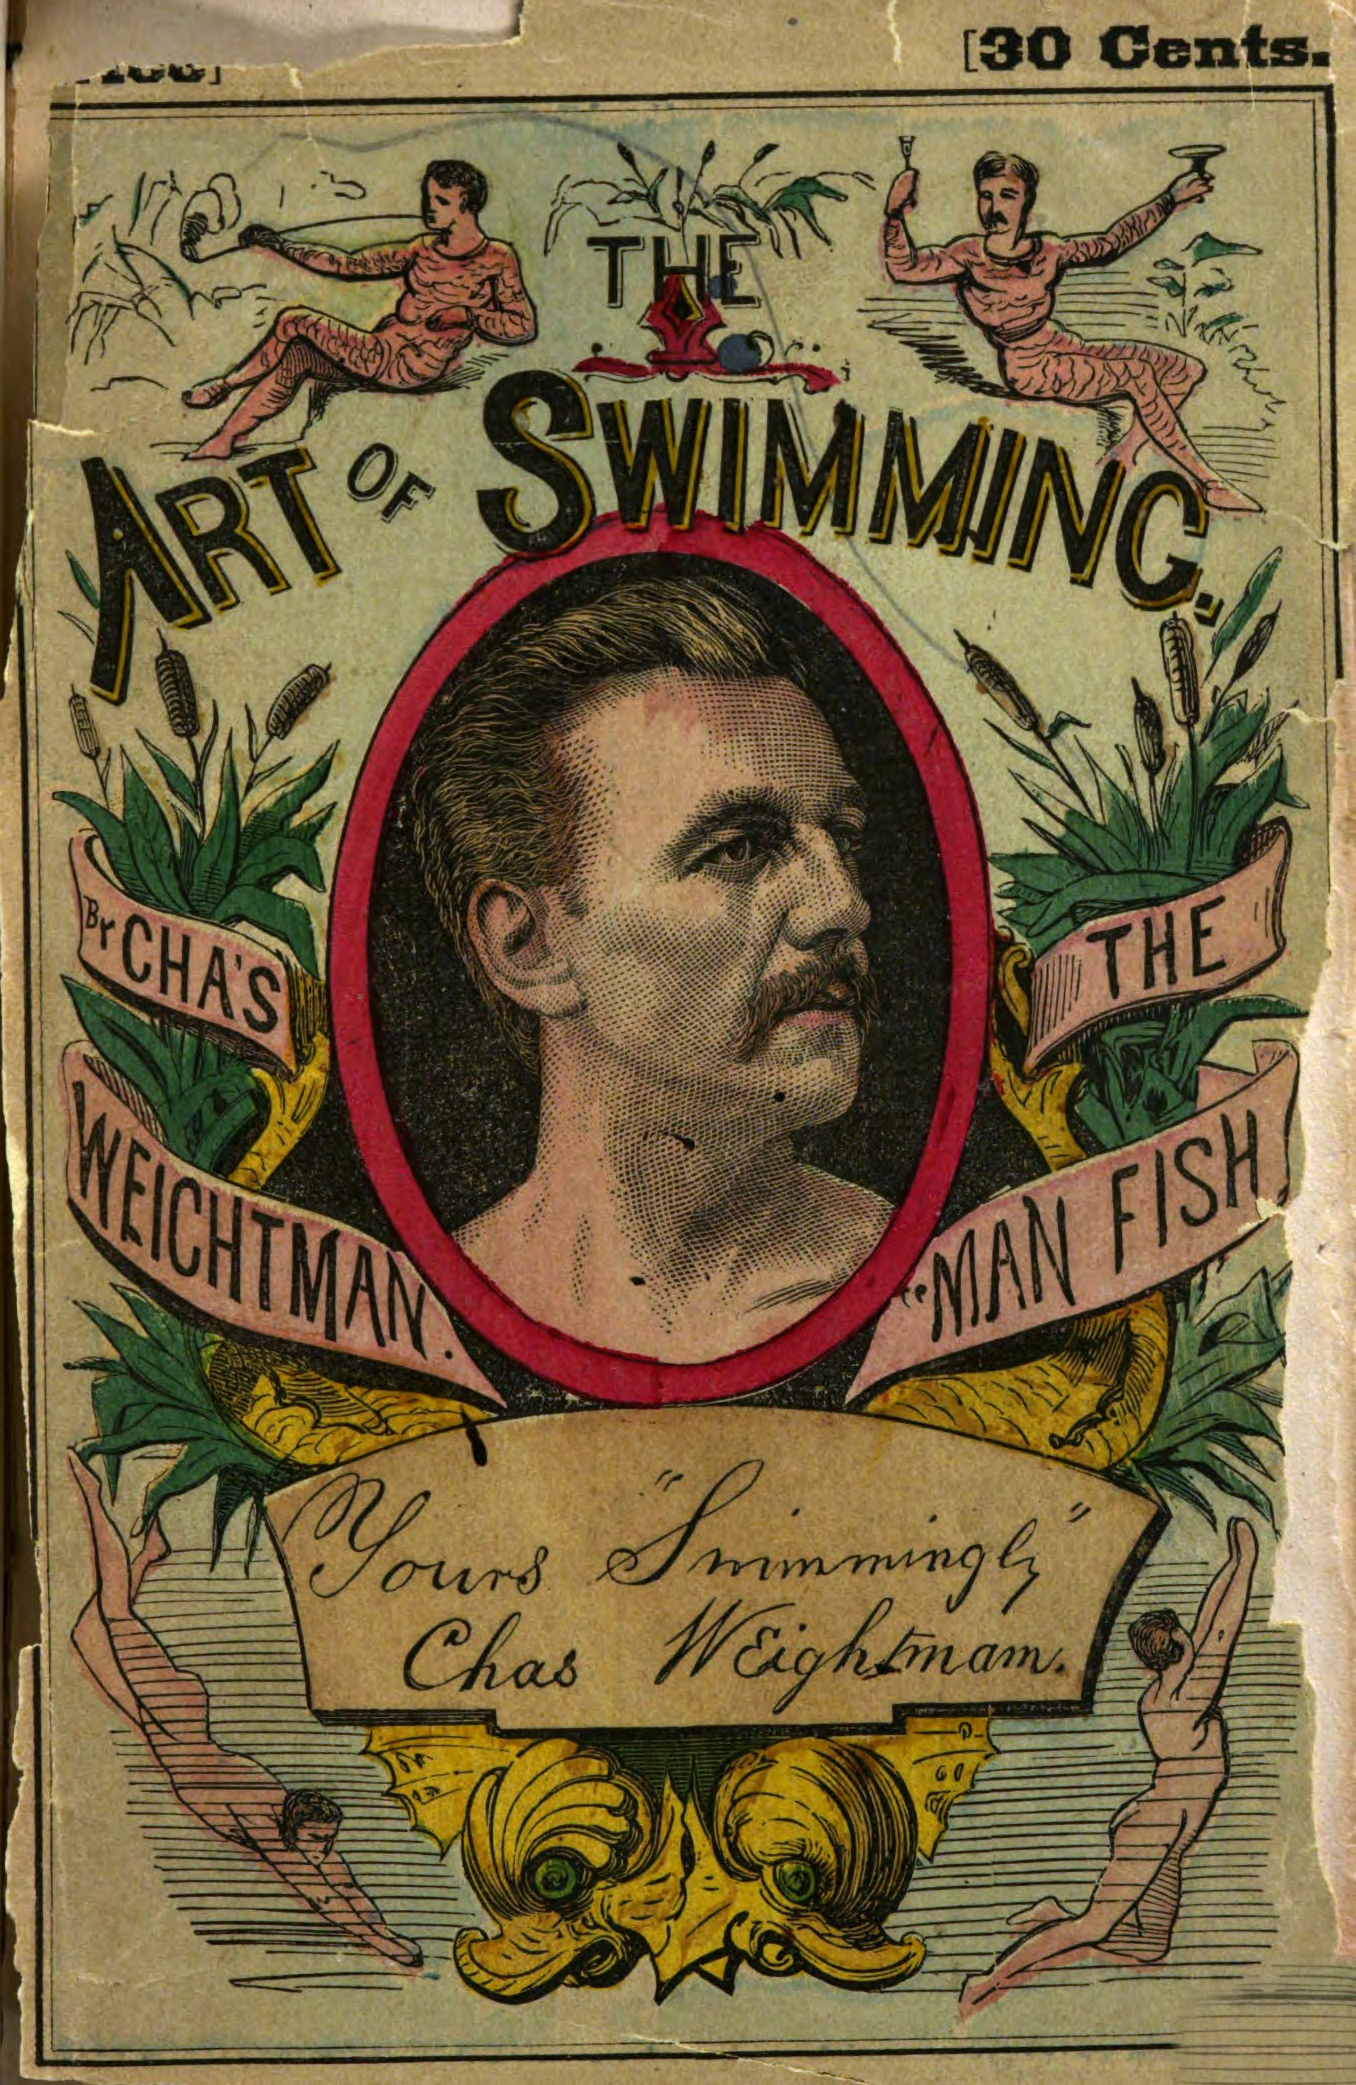 cover for The Art of Swimming (1873) by Charles Weightman.jpg